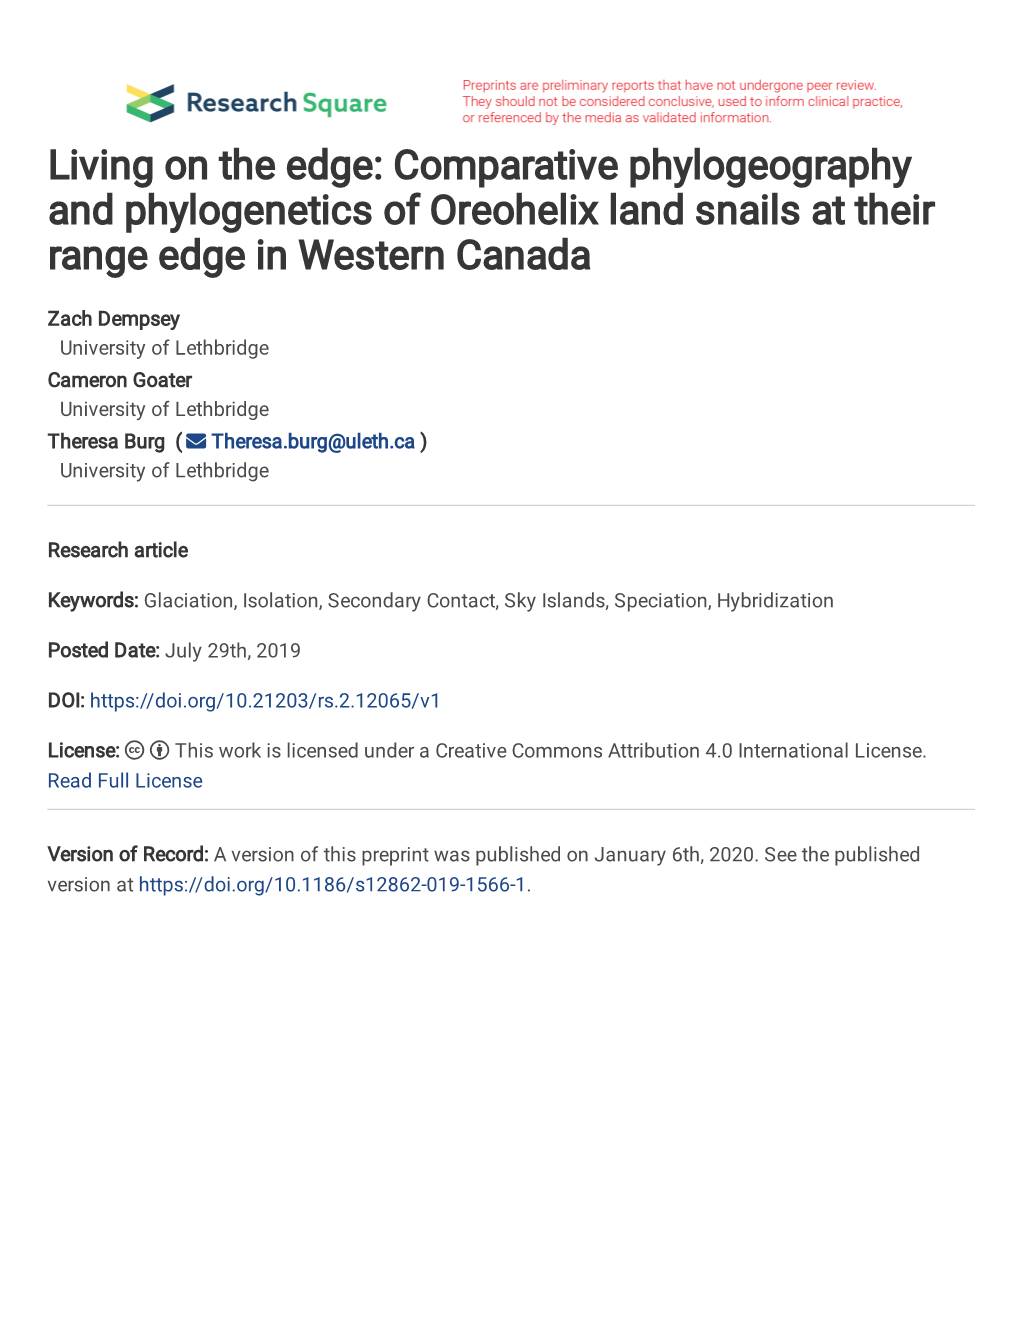 Comparative Phylogeography and Phylogenetics of Oreohelix Land Snails at Their Range Edge in Western Canada